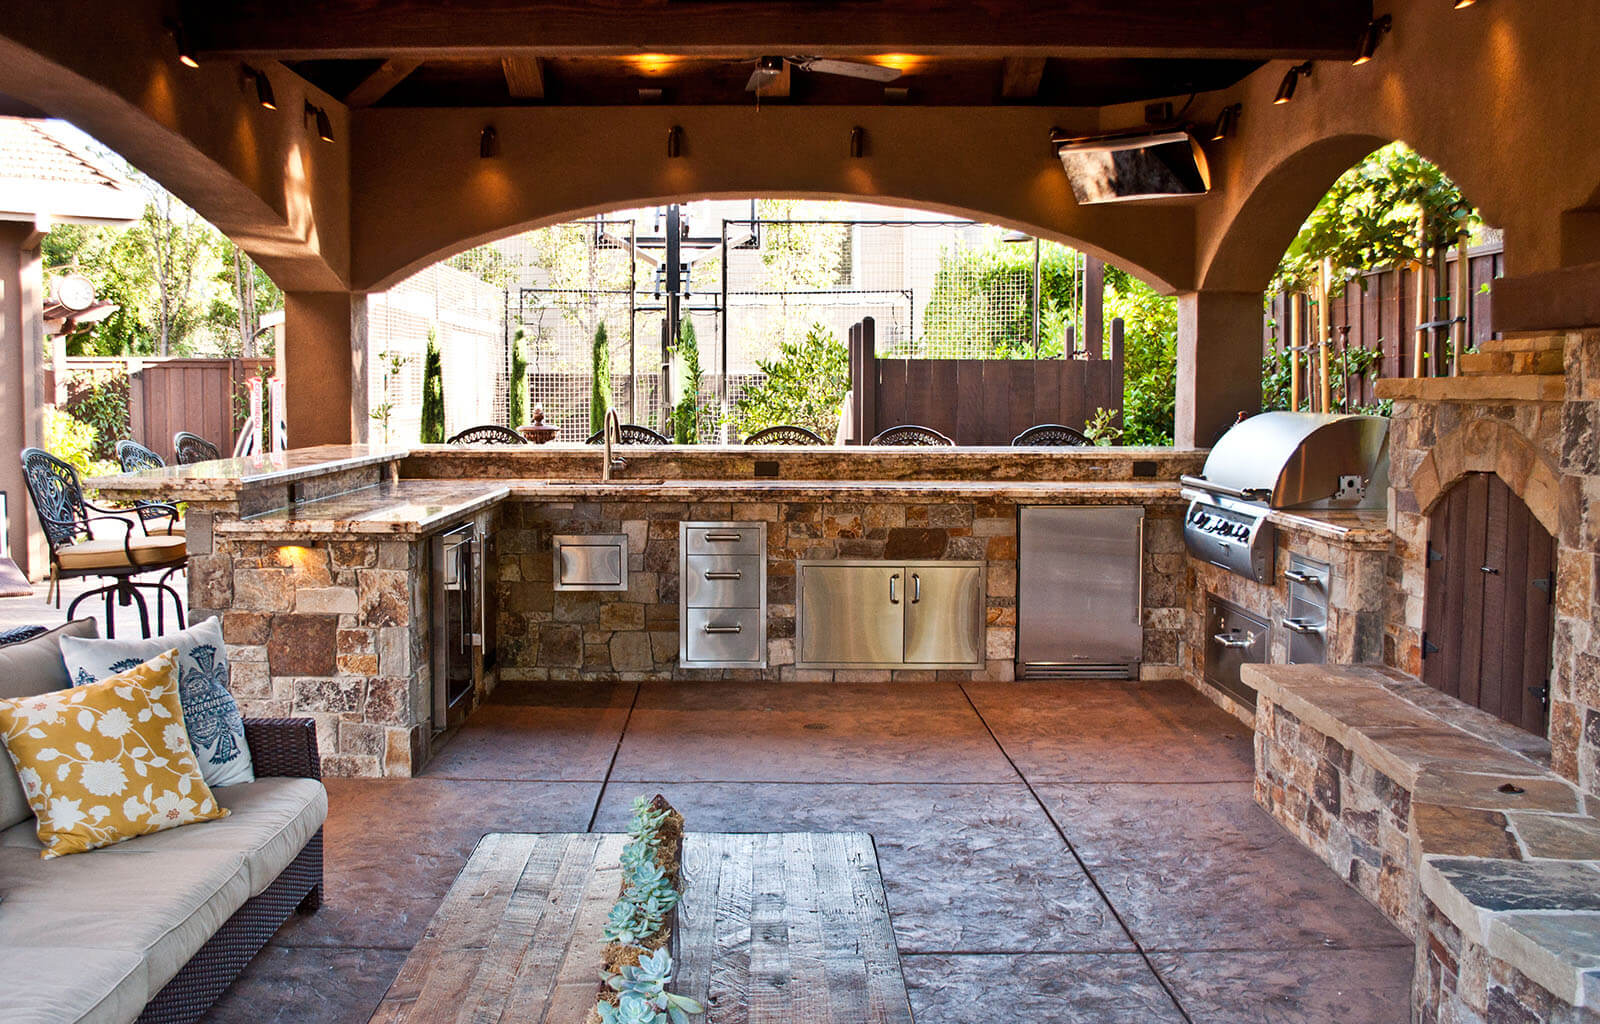 Rustic outdoor covered cooking and grilling area with fireplace and lounge, bar seating, and accented archways